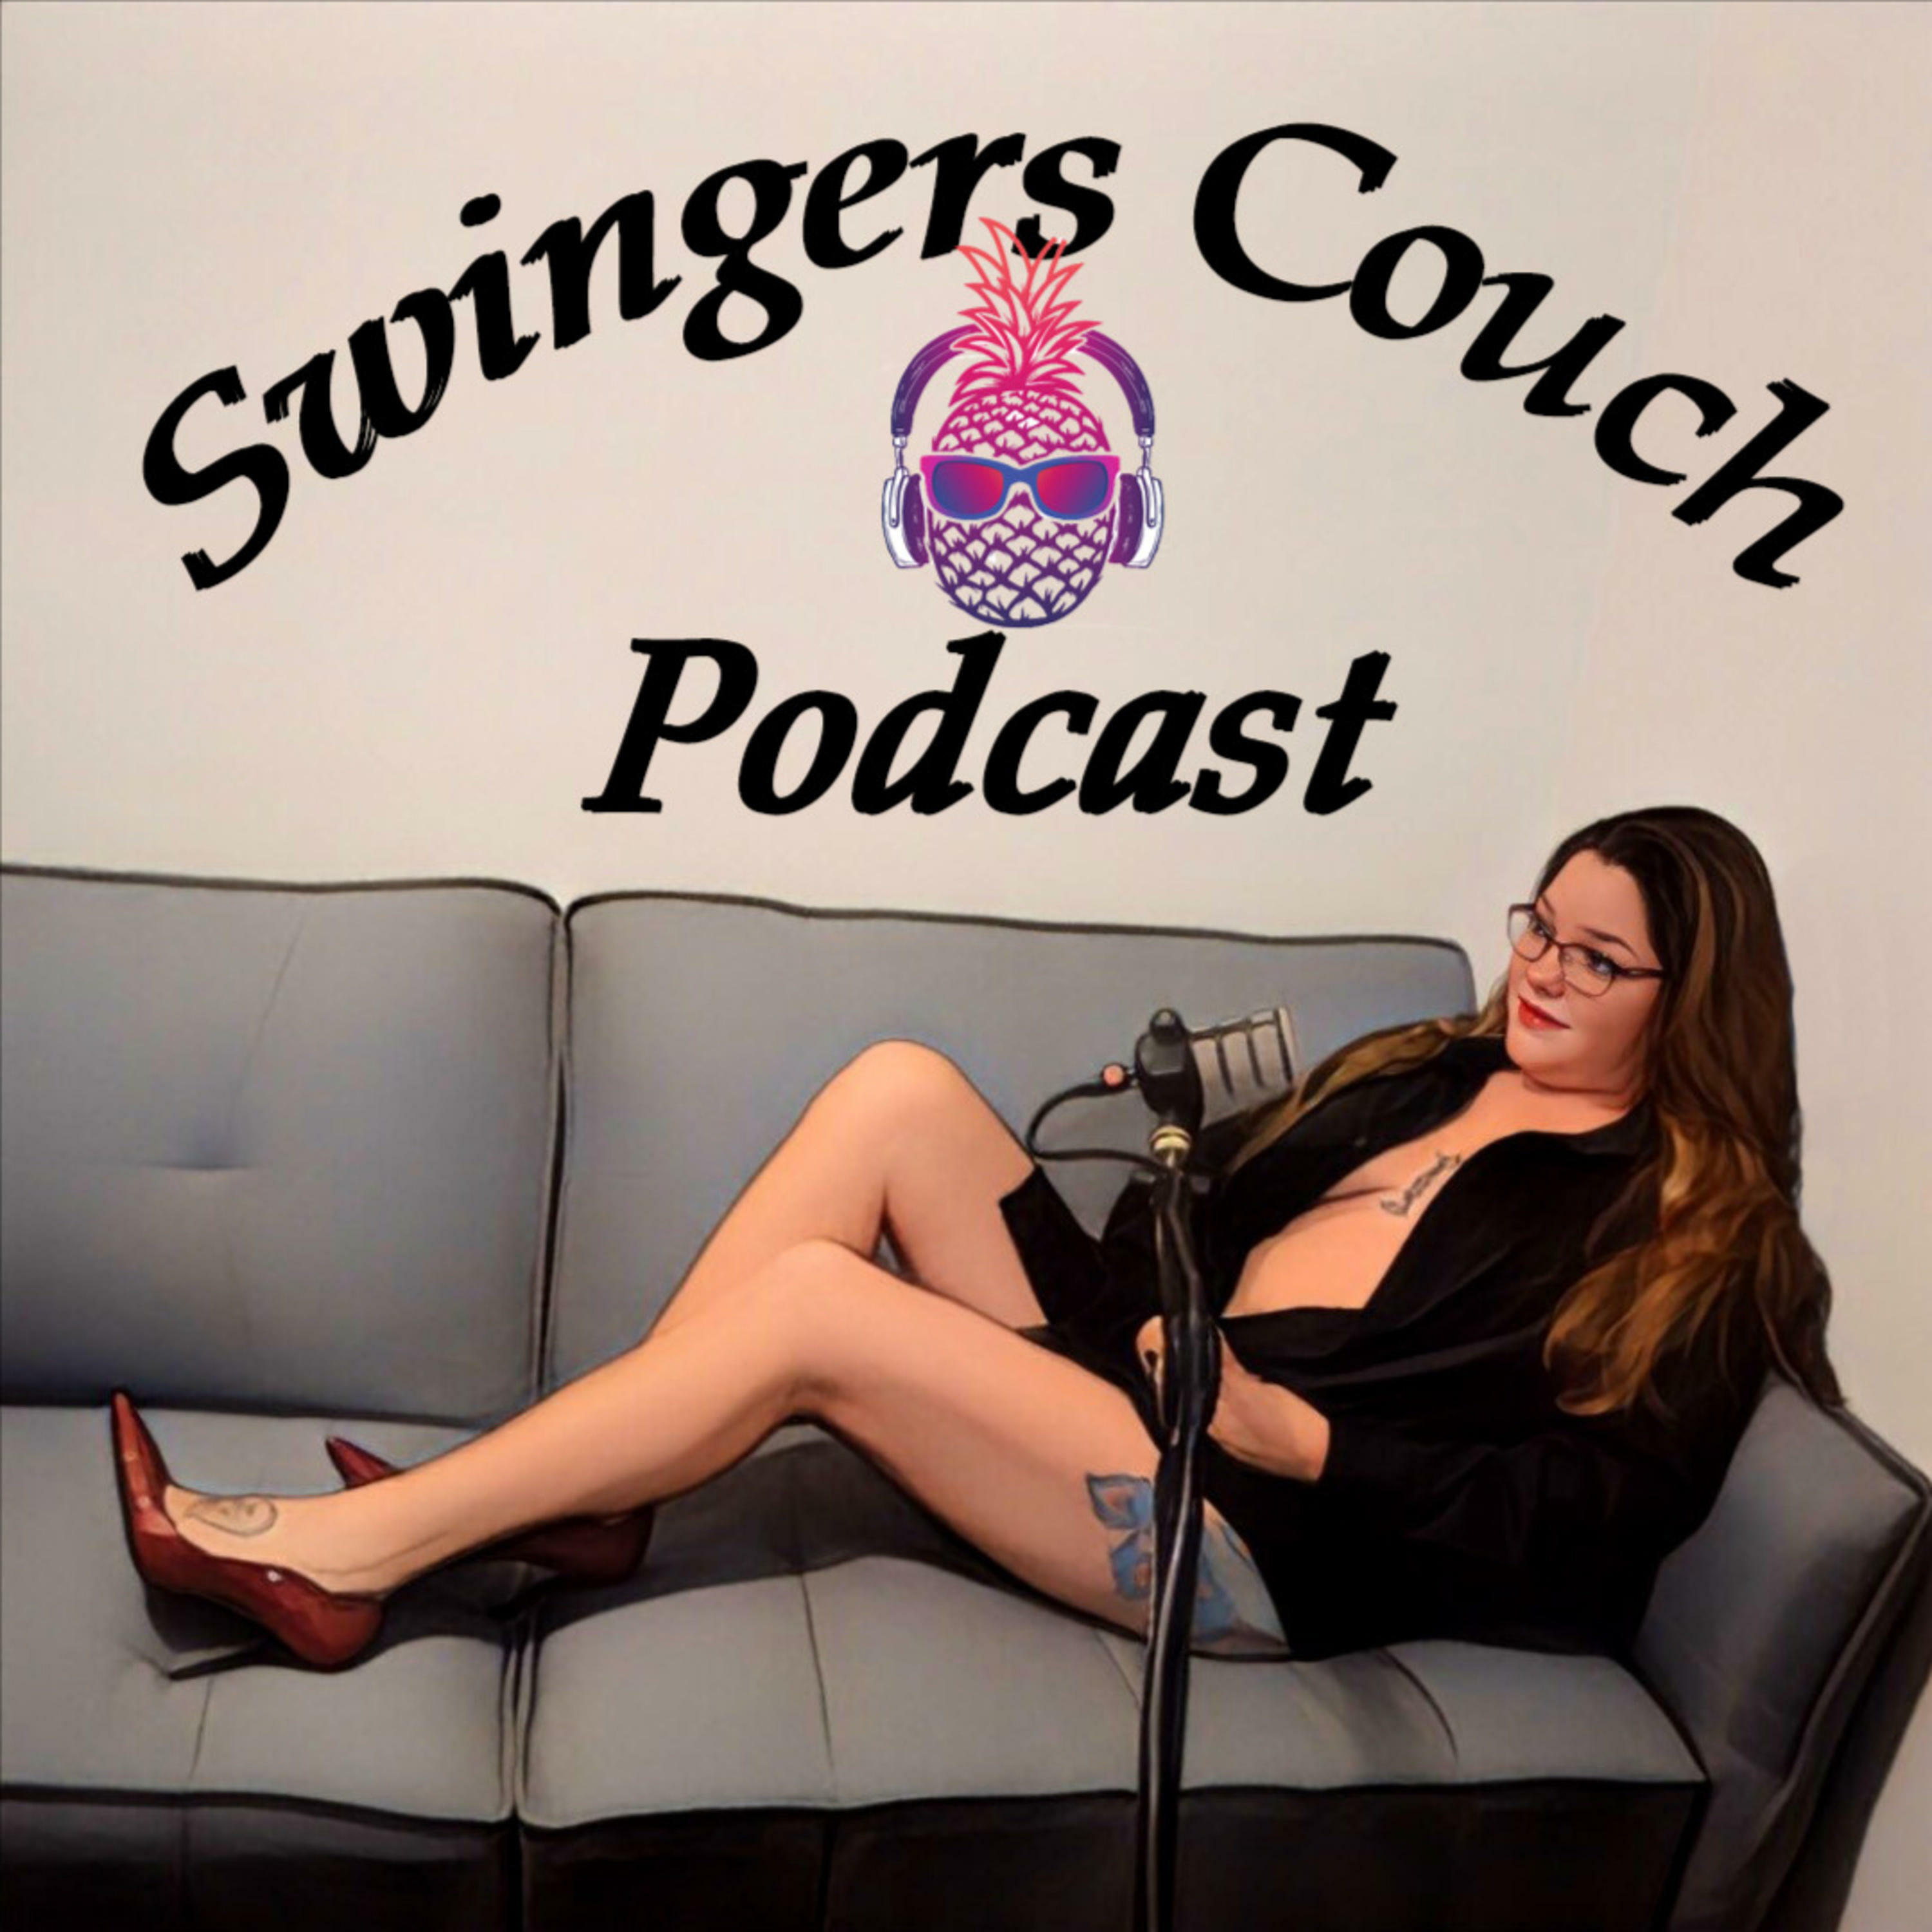 ♫ swingers couch podcast Swingers couch podcast was created to share our sexy stories and help people by answering some of their questions about the Lifestyle